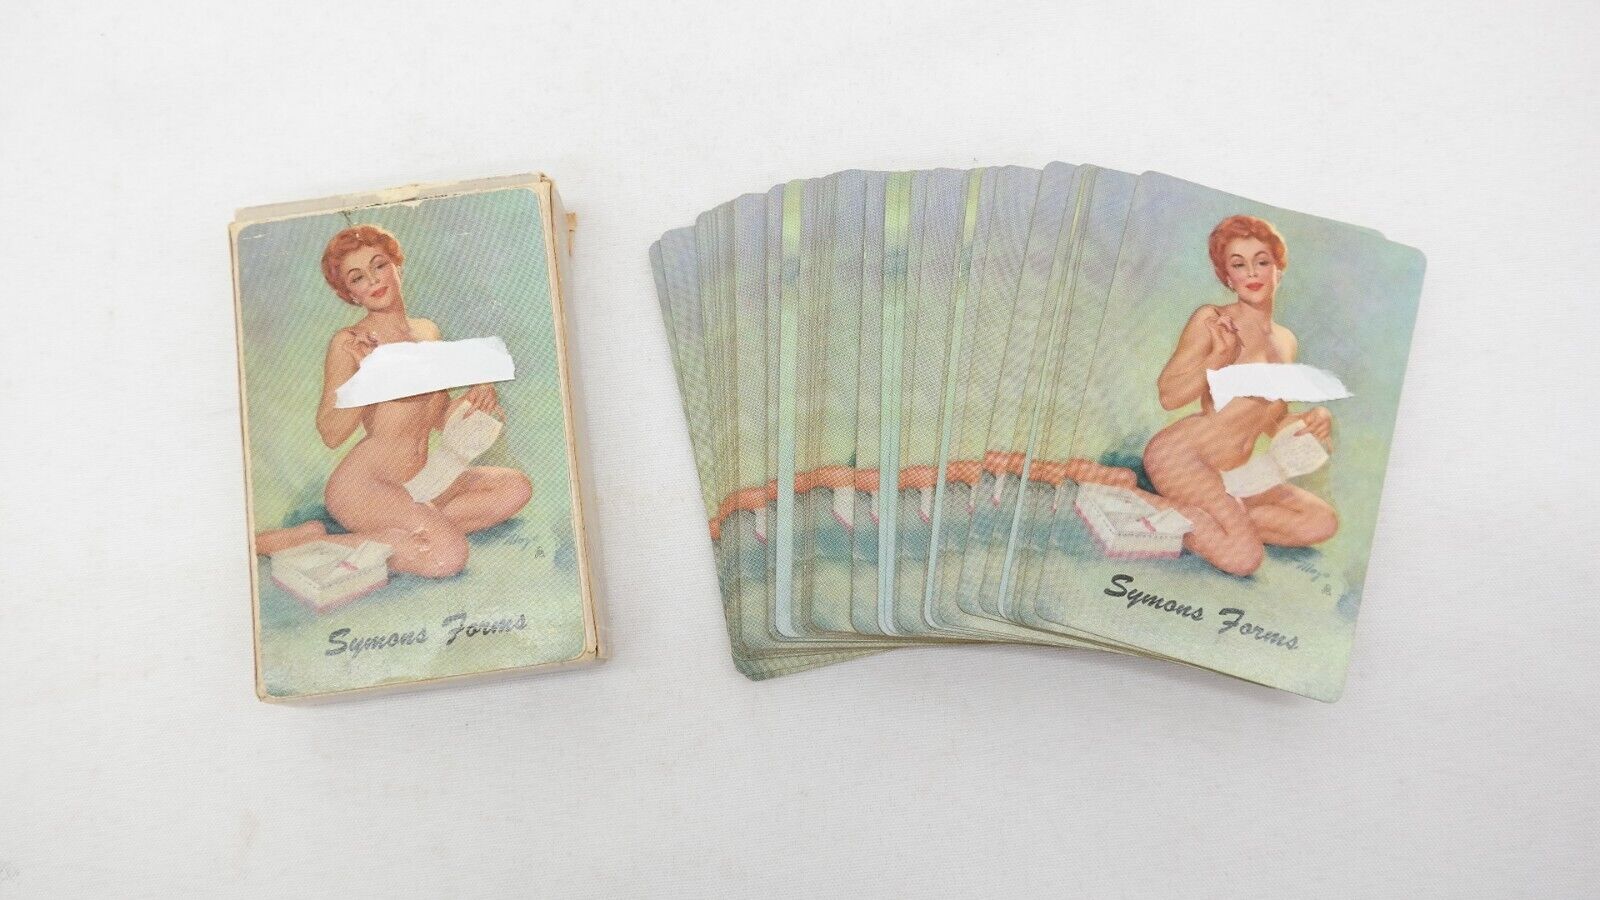 Vintage Redi Slip Risque Pin Up Playing Cards Symons Forms 53 Cards   TF